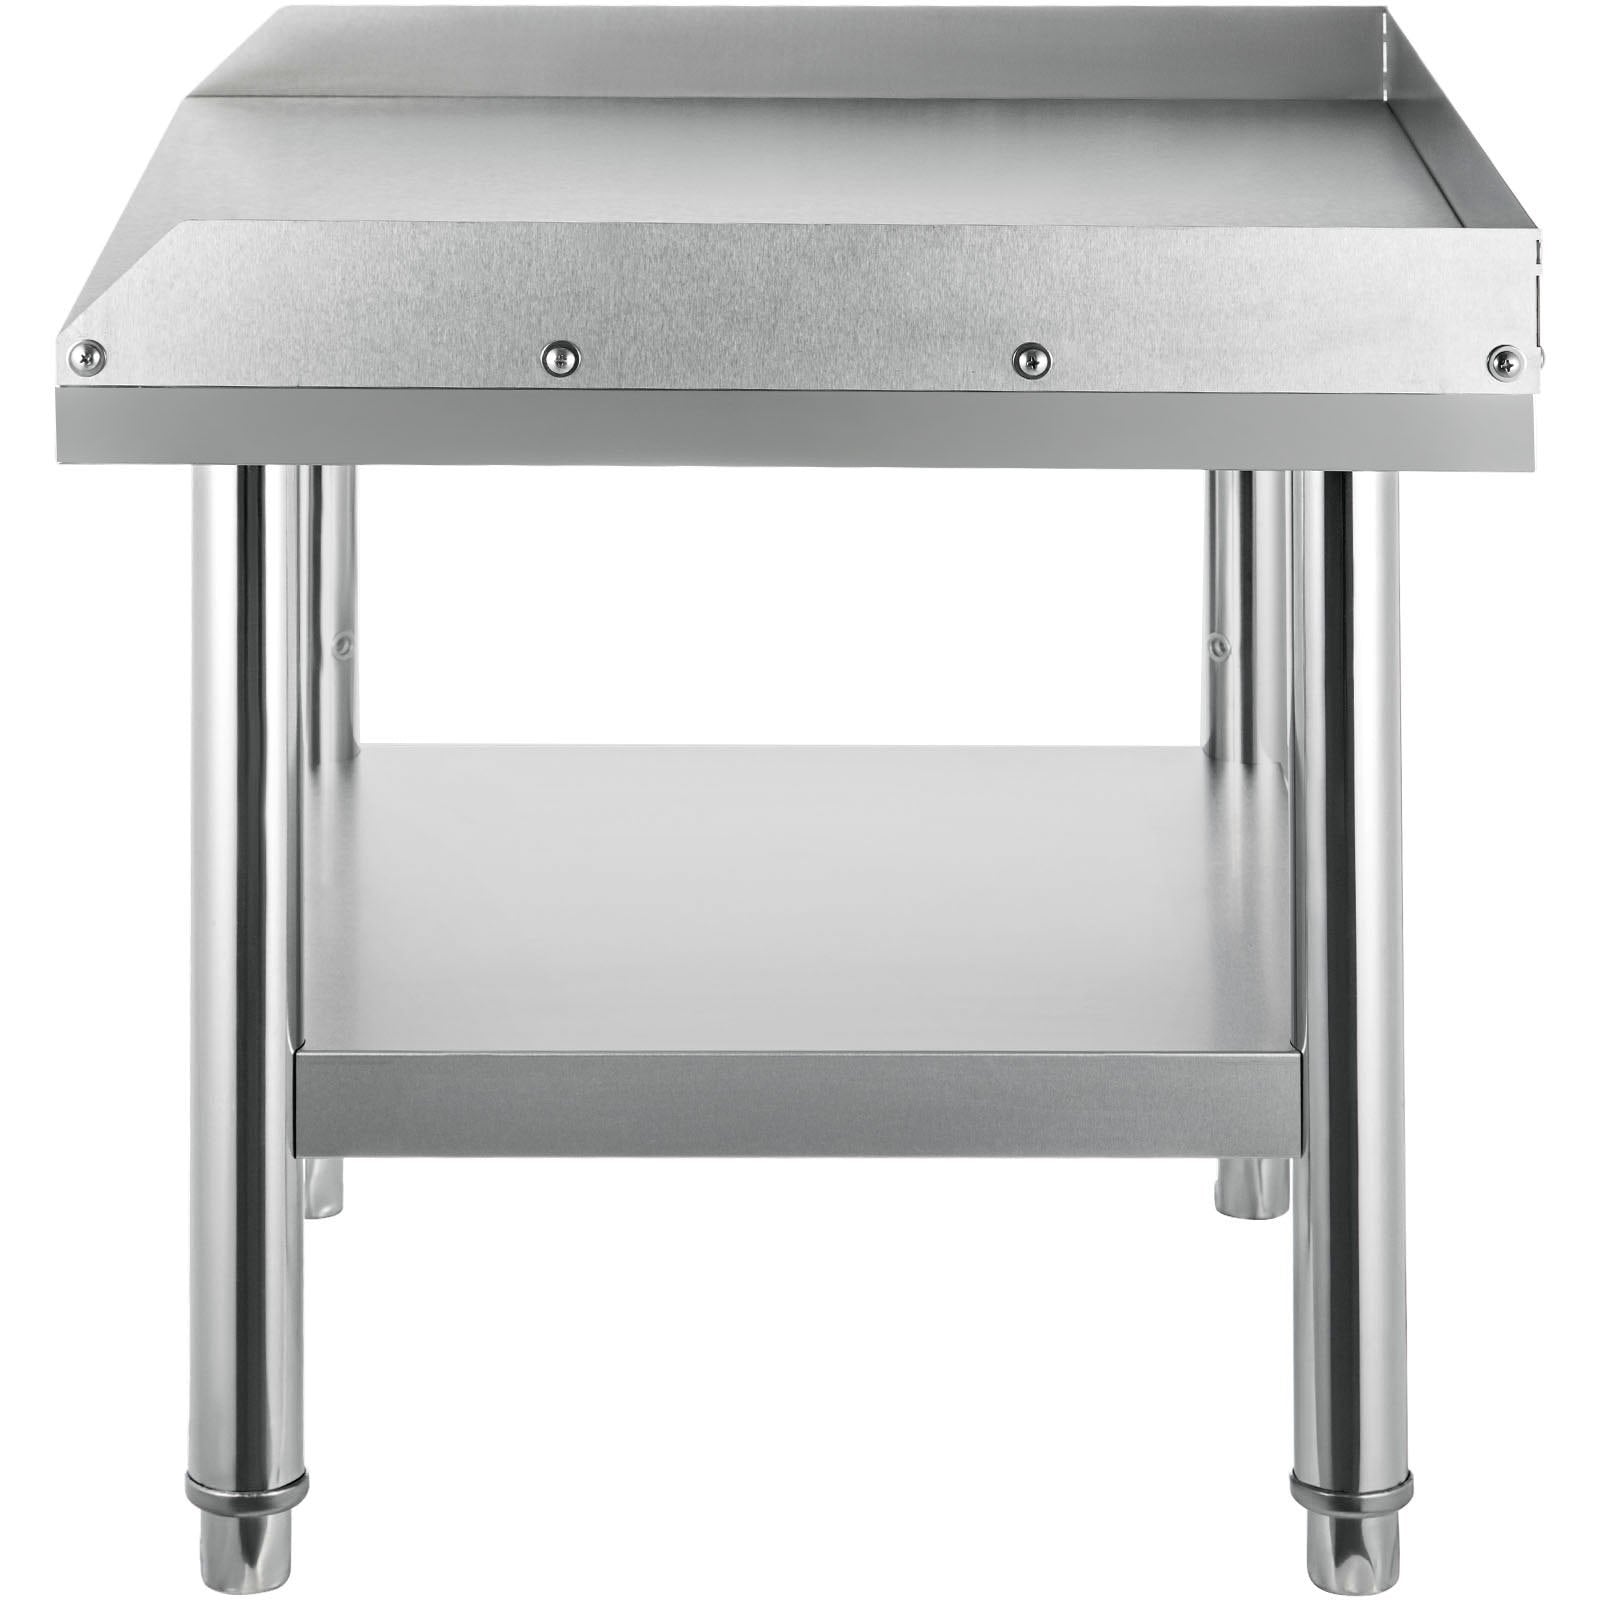 Stainless Steel Equipment Grill Stand-9